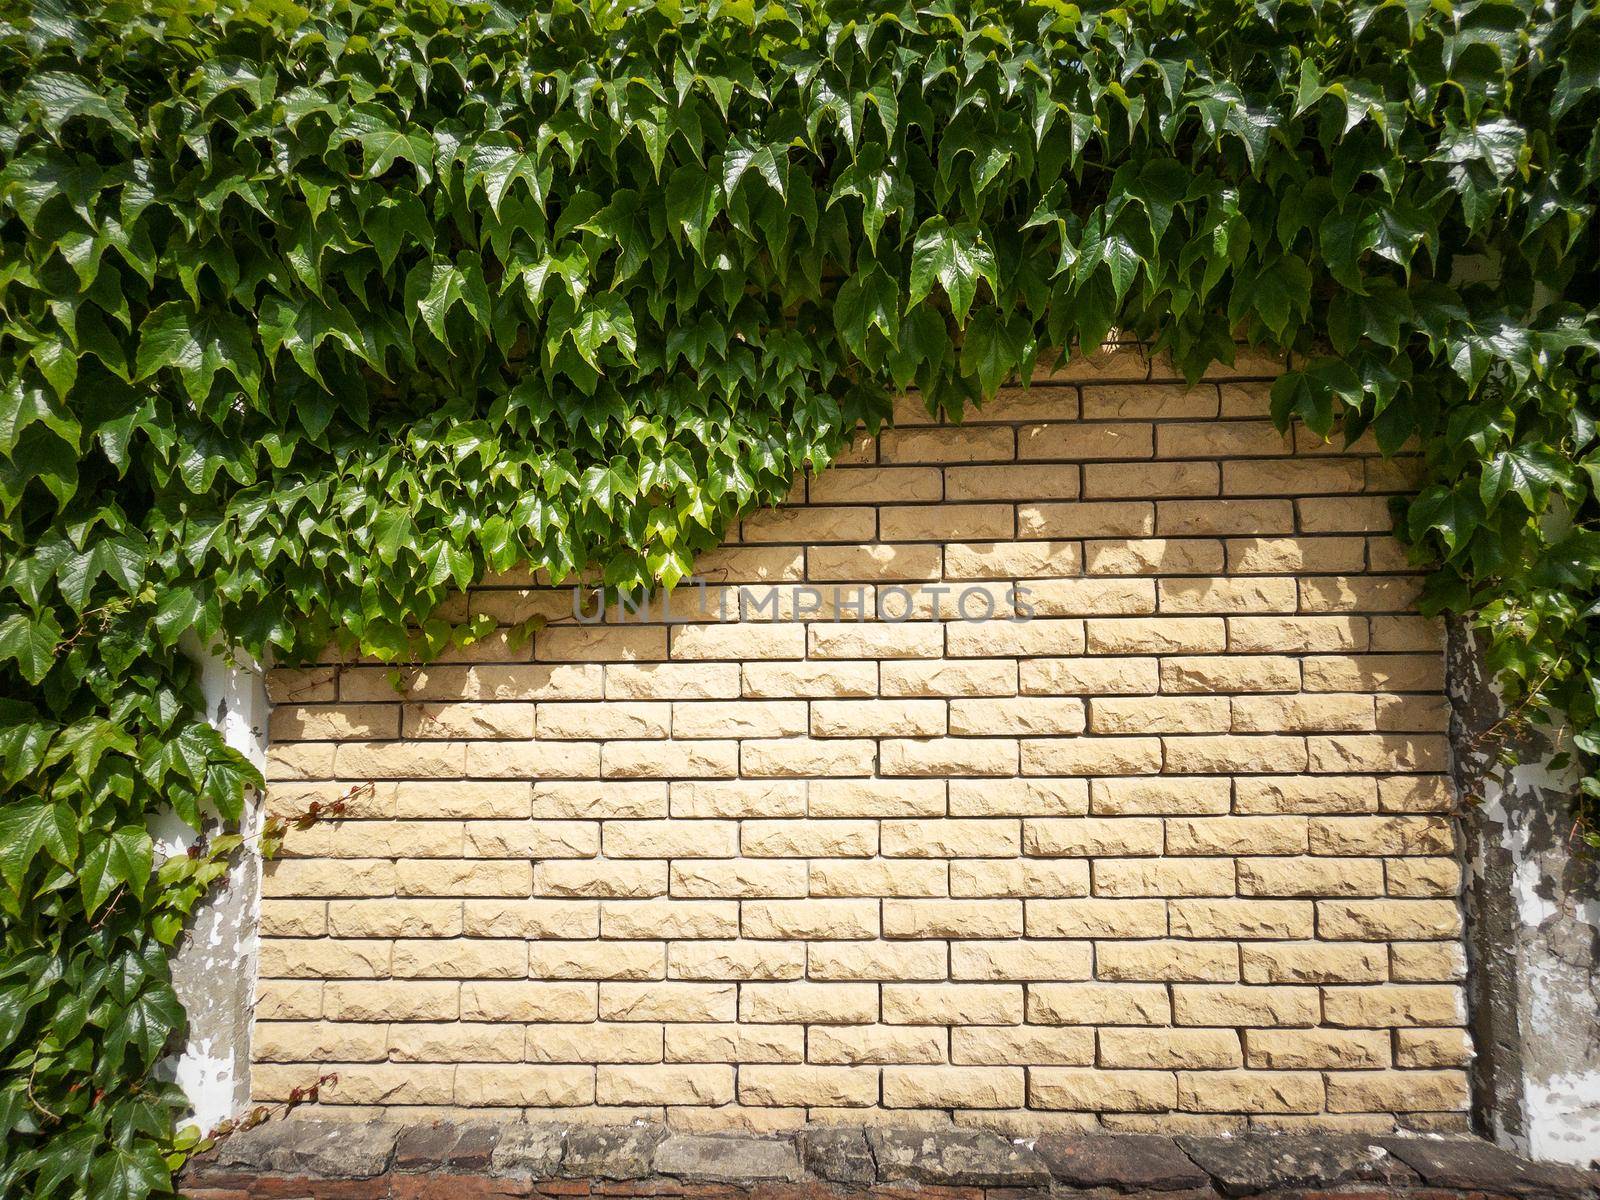 The fence is made of beige textured brick covered with plants by AlexGrec